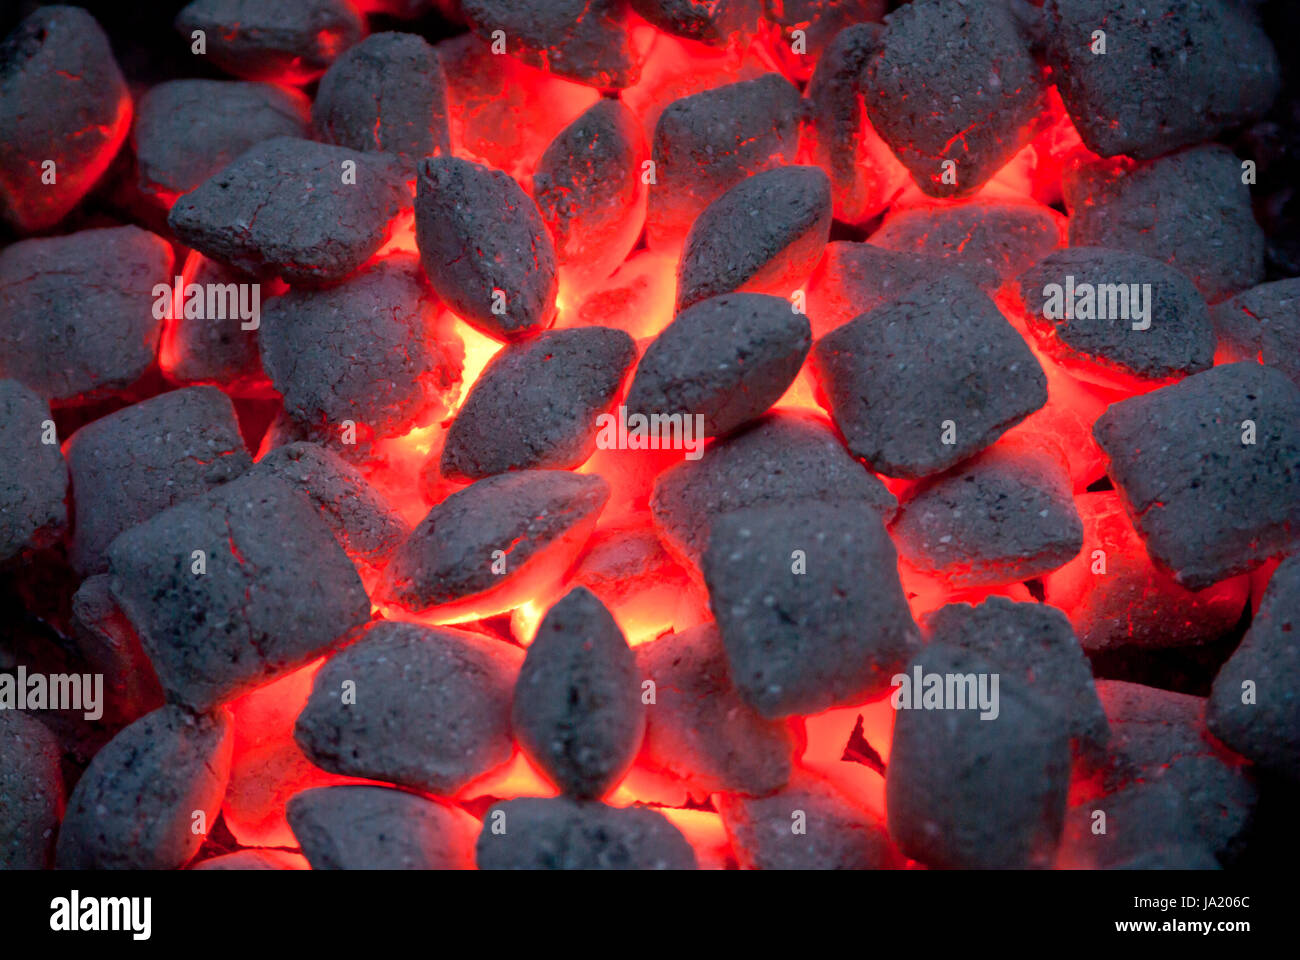 fire, conflagration, coal, grill, barbecue, barbeque, charcoal, heat, summer, Stock Photo